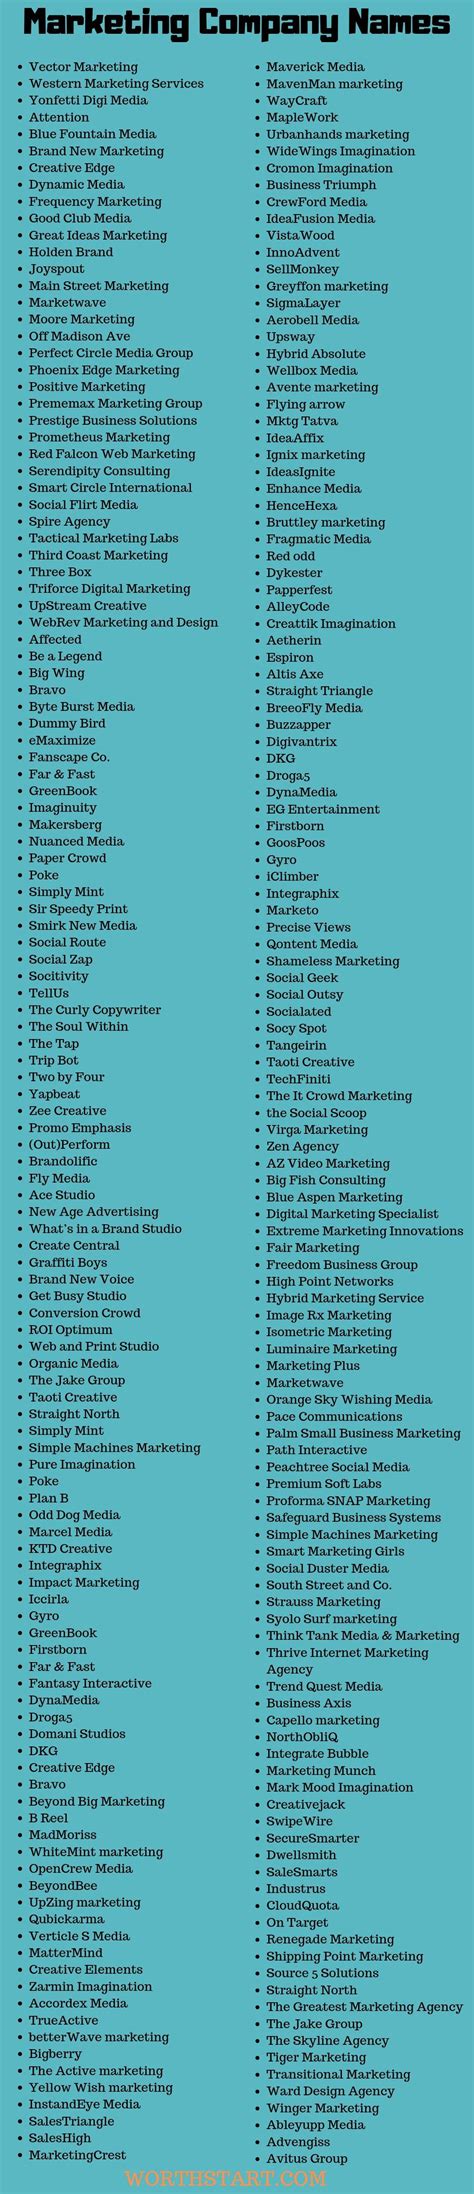 Choosing boring names will act as. 325 Marketing Company Names Ideas & Suggestions - Worth Start